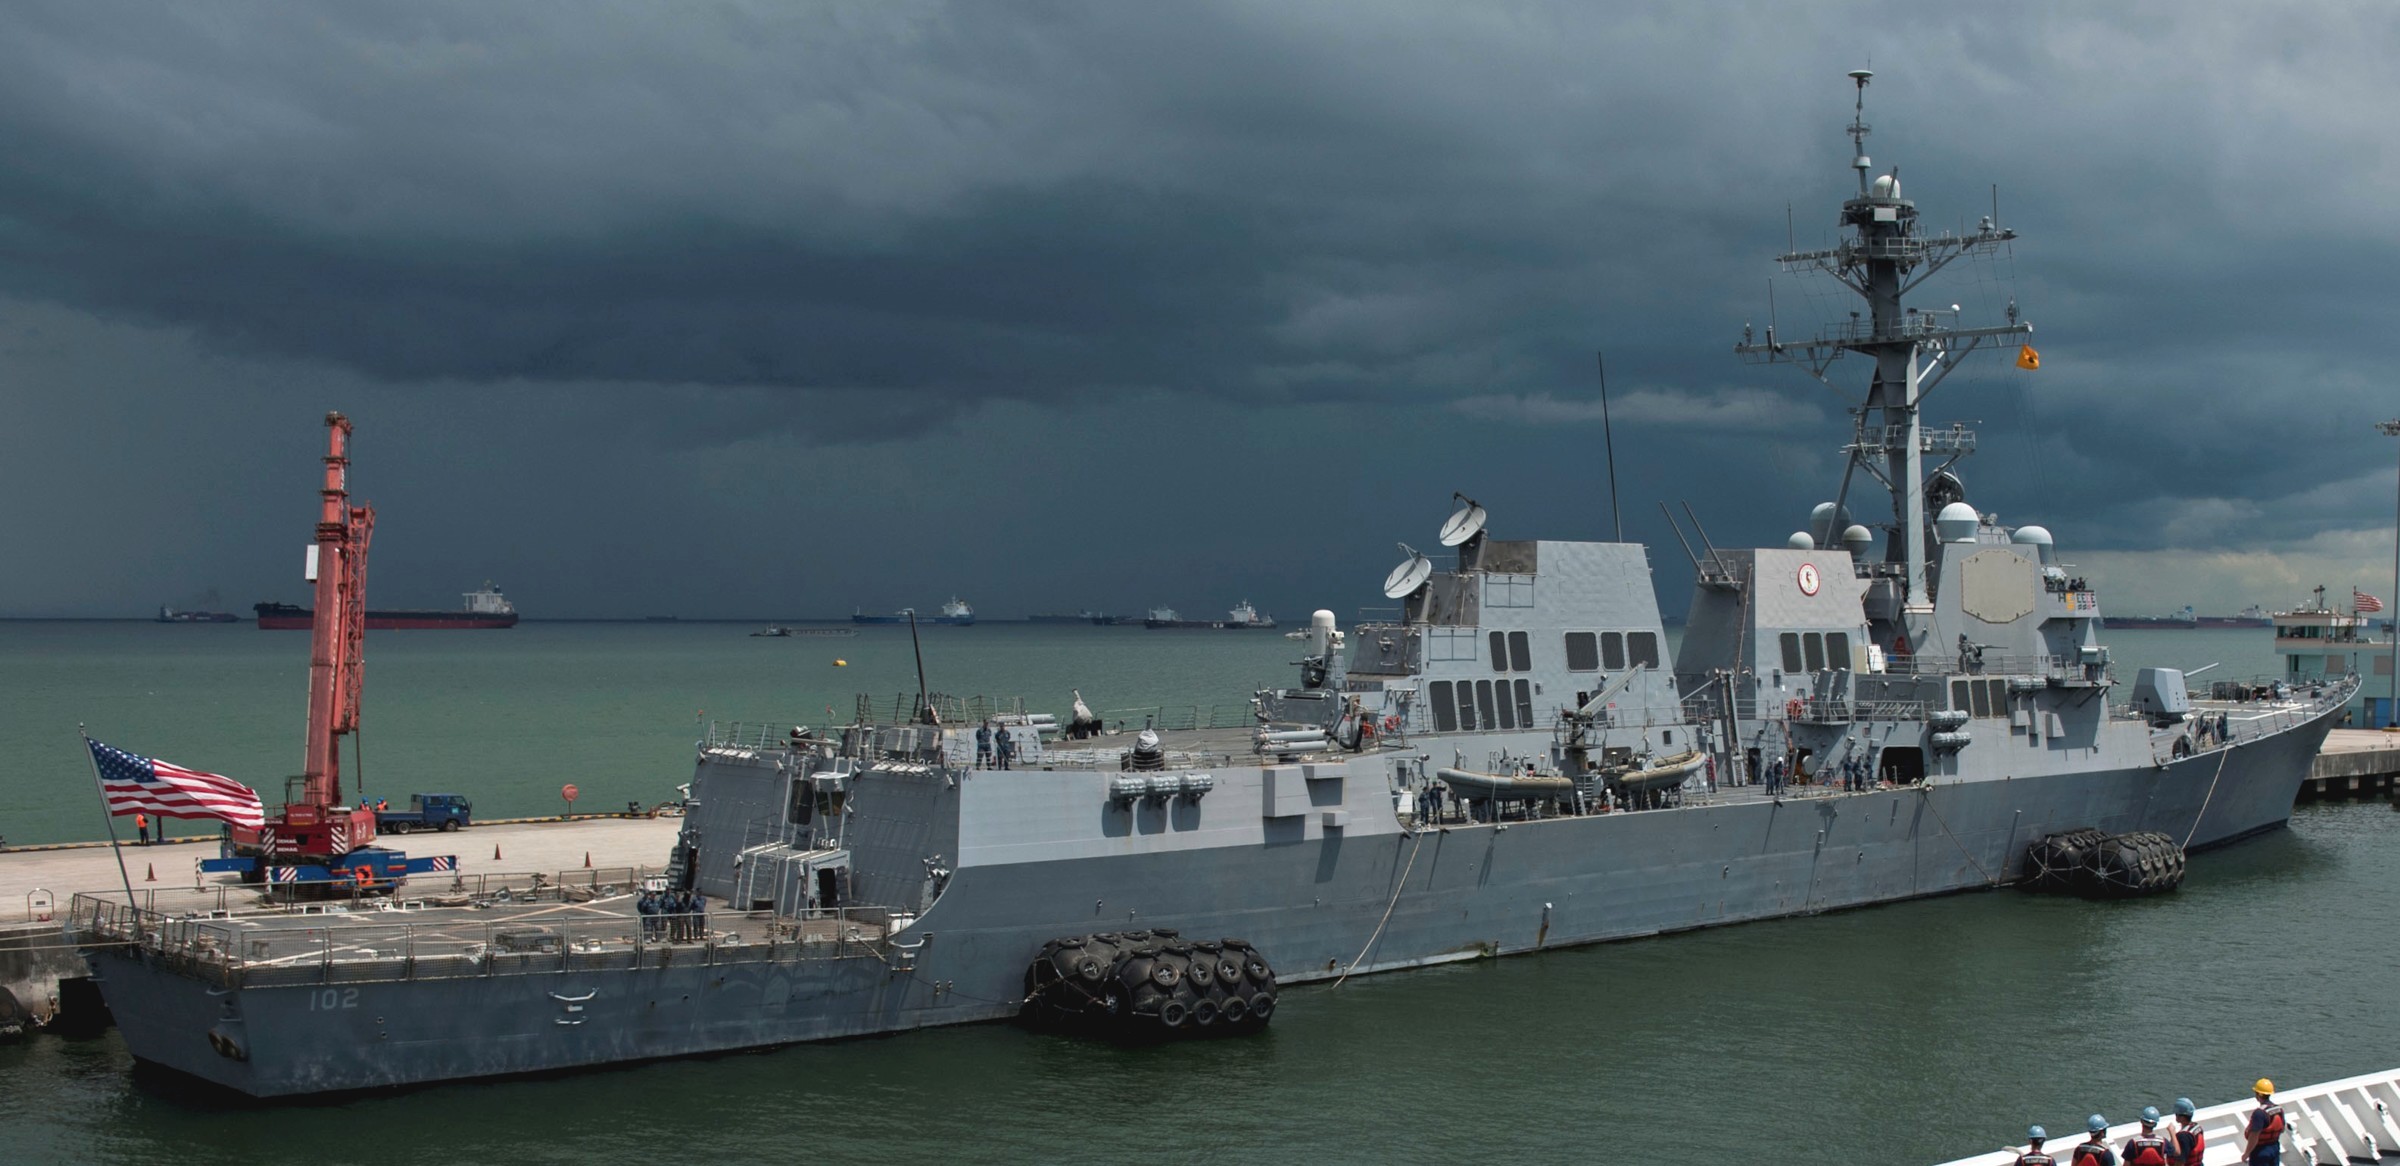 ddg-102 uss sampson arleigh burke class guided missile destroyer aegis us navy changi singapore 21